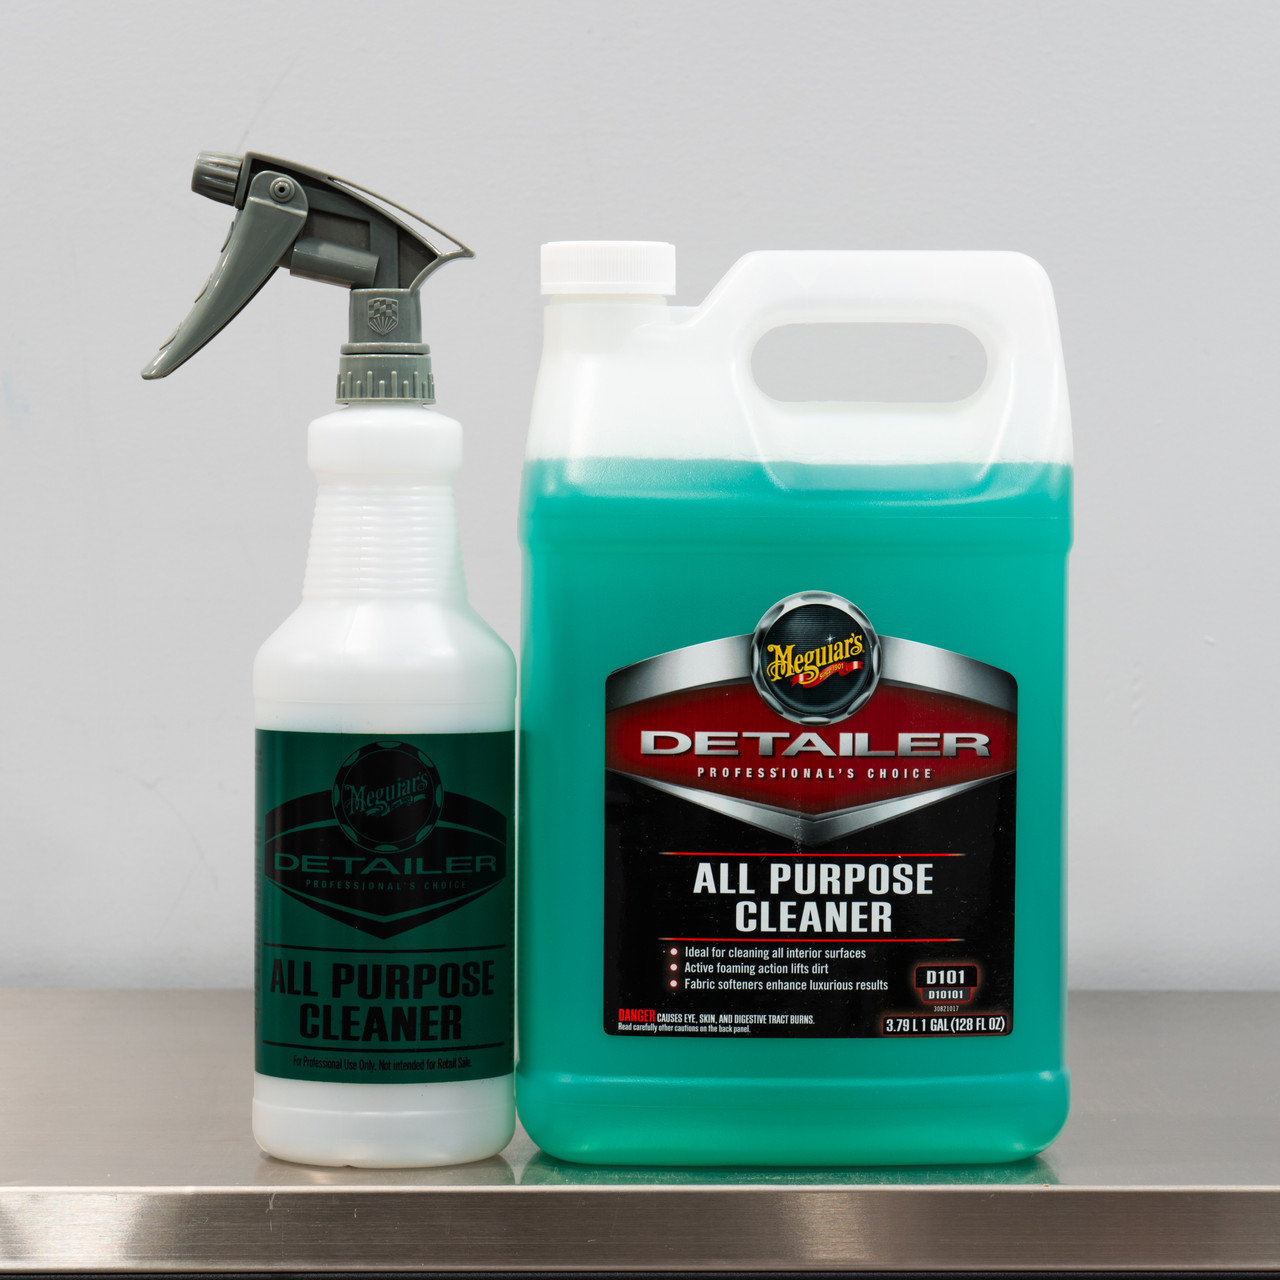 All Purpose Cleaning Spray